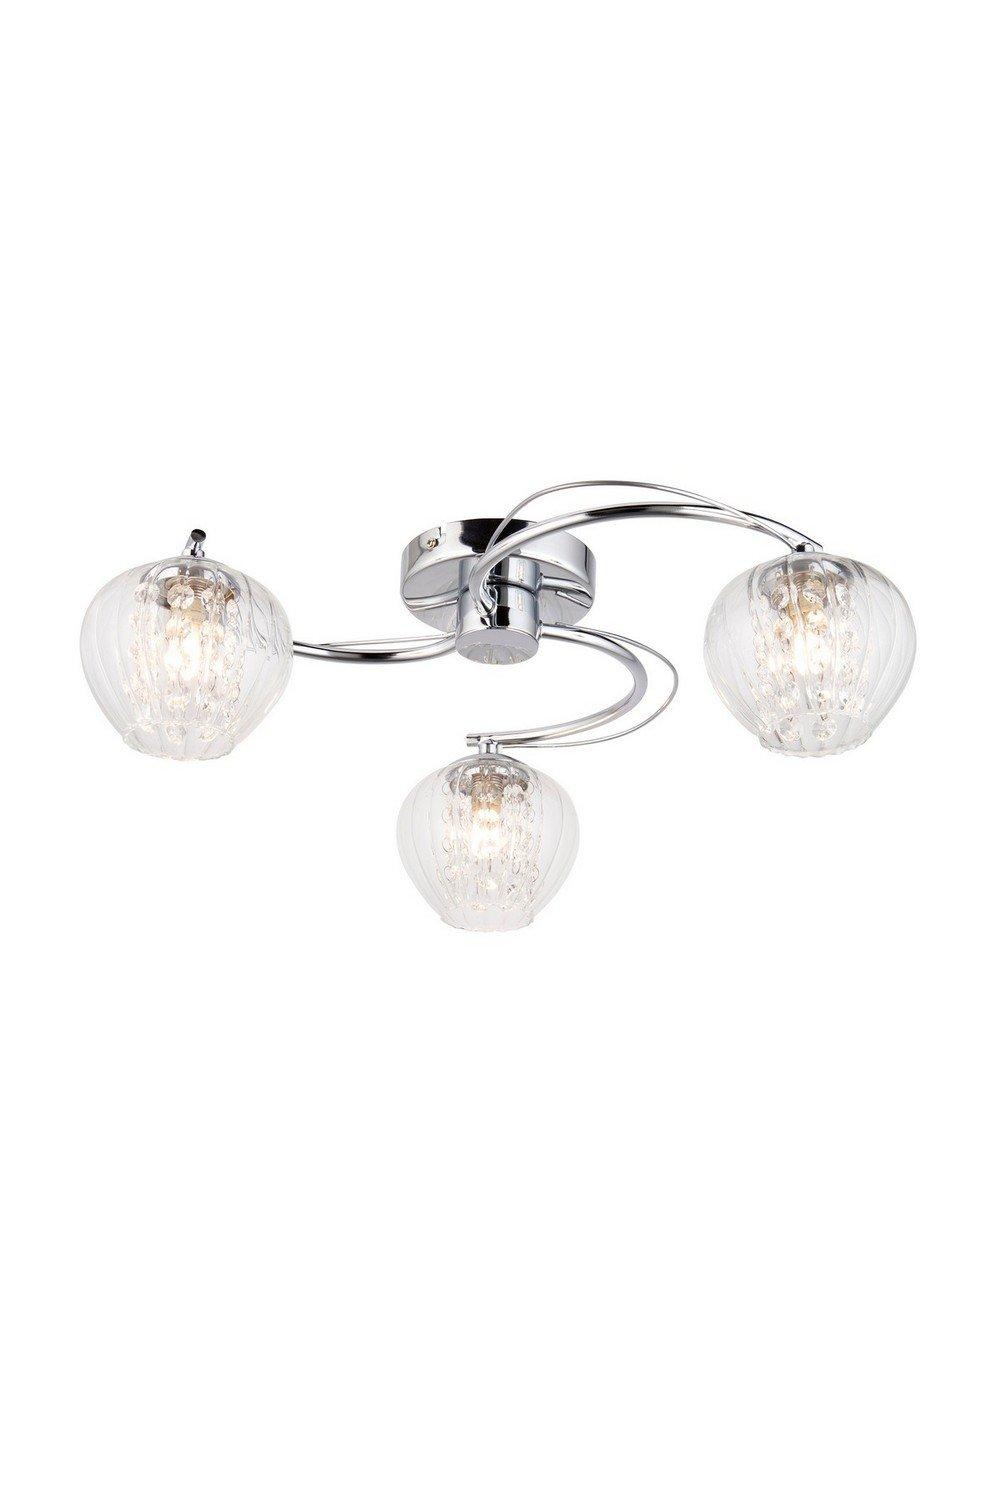 Mesmer Multi Arm Glass Semi Flush Ceiling Lamp Chrome Plate With Glass Glass Beads